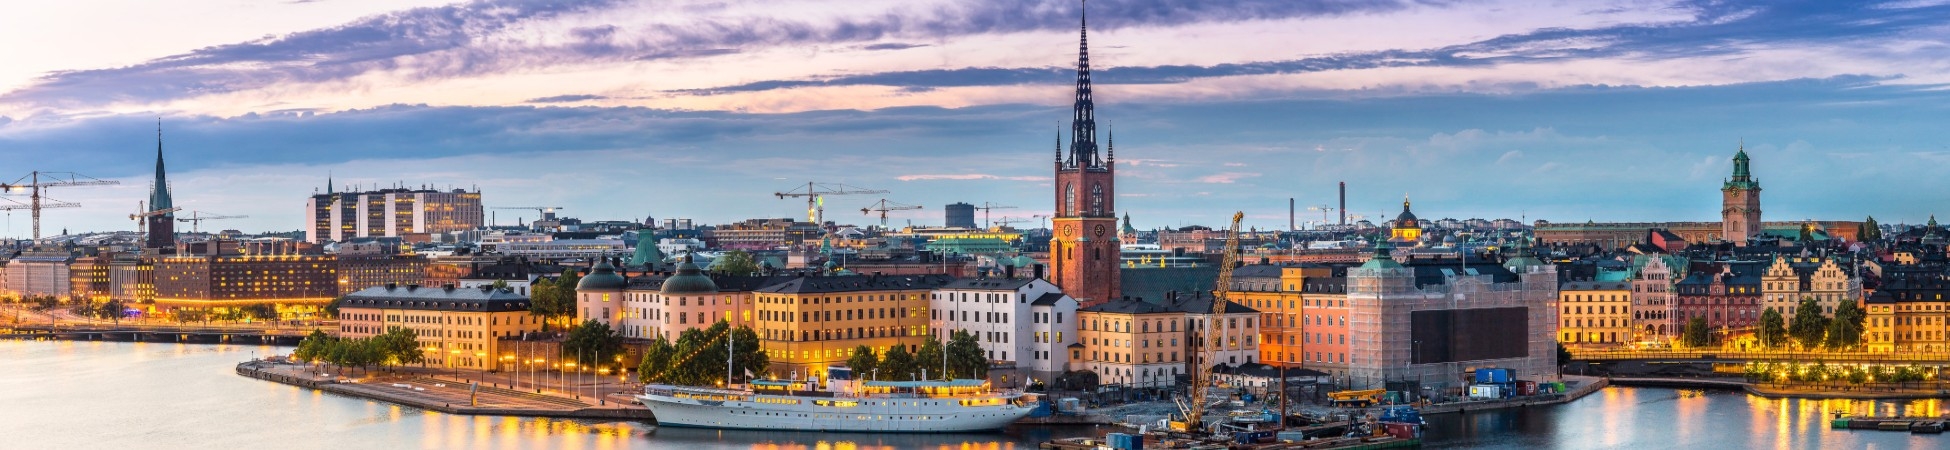 Panoramic view of Old Town in Stockholm